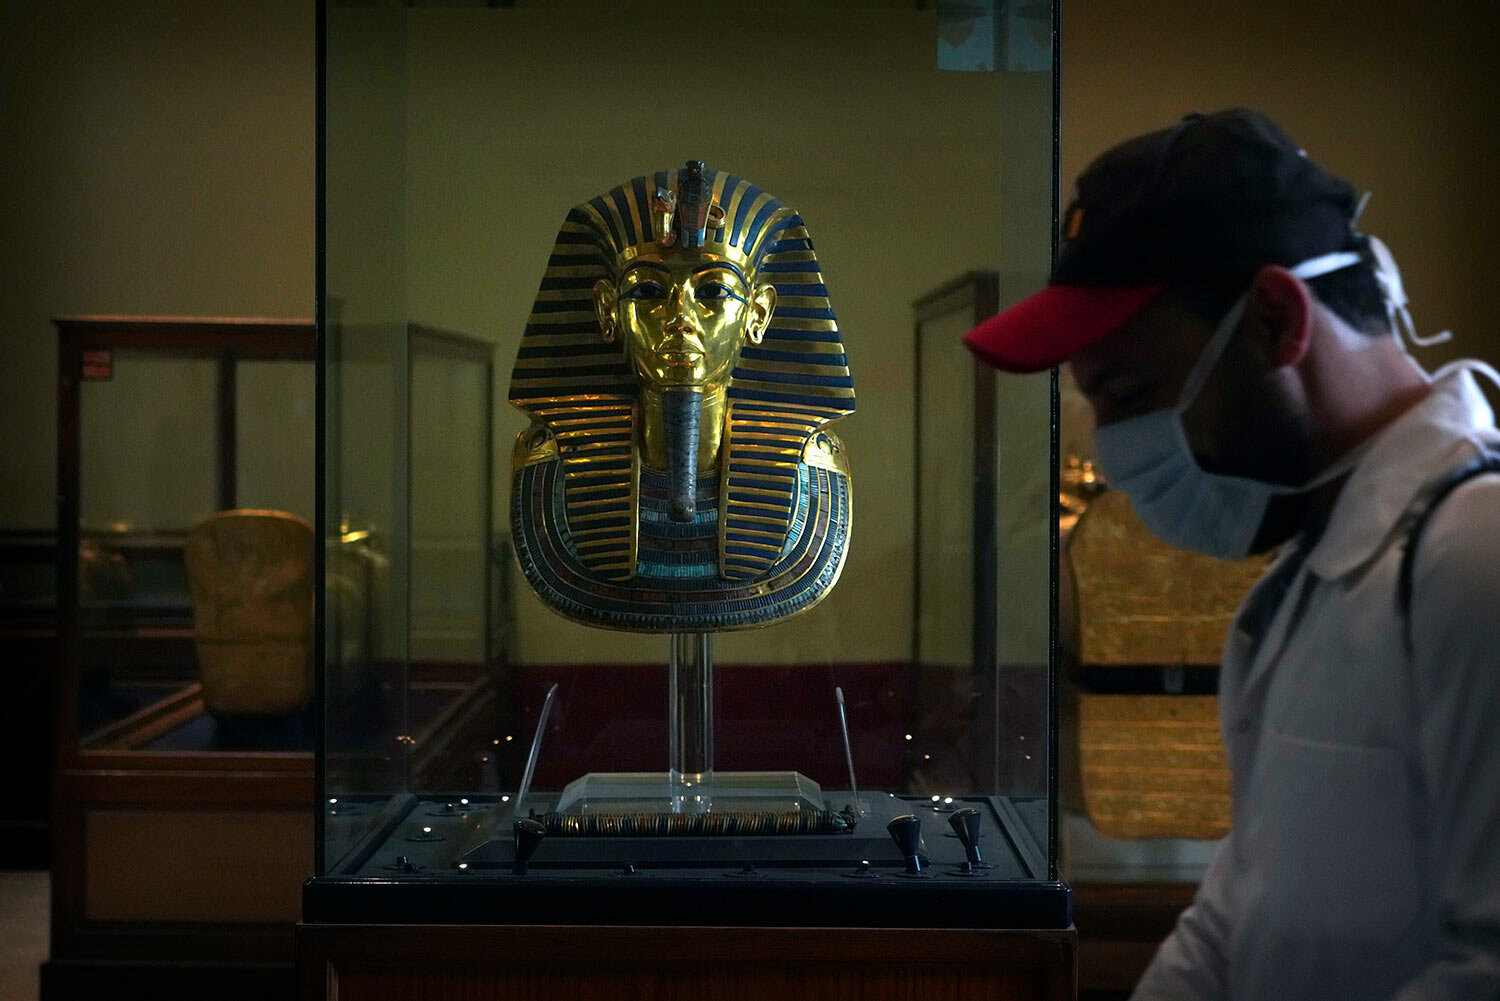  A worker disinfects around King Tut's famous mask in the Egyptian Museum in an effort to help prevent the spread of the coronavirus, in Tahrir Square, Cairo, Egypt, March 23, 2020. (AP Photo/Hamada Elrasam) 